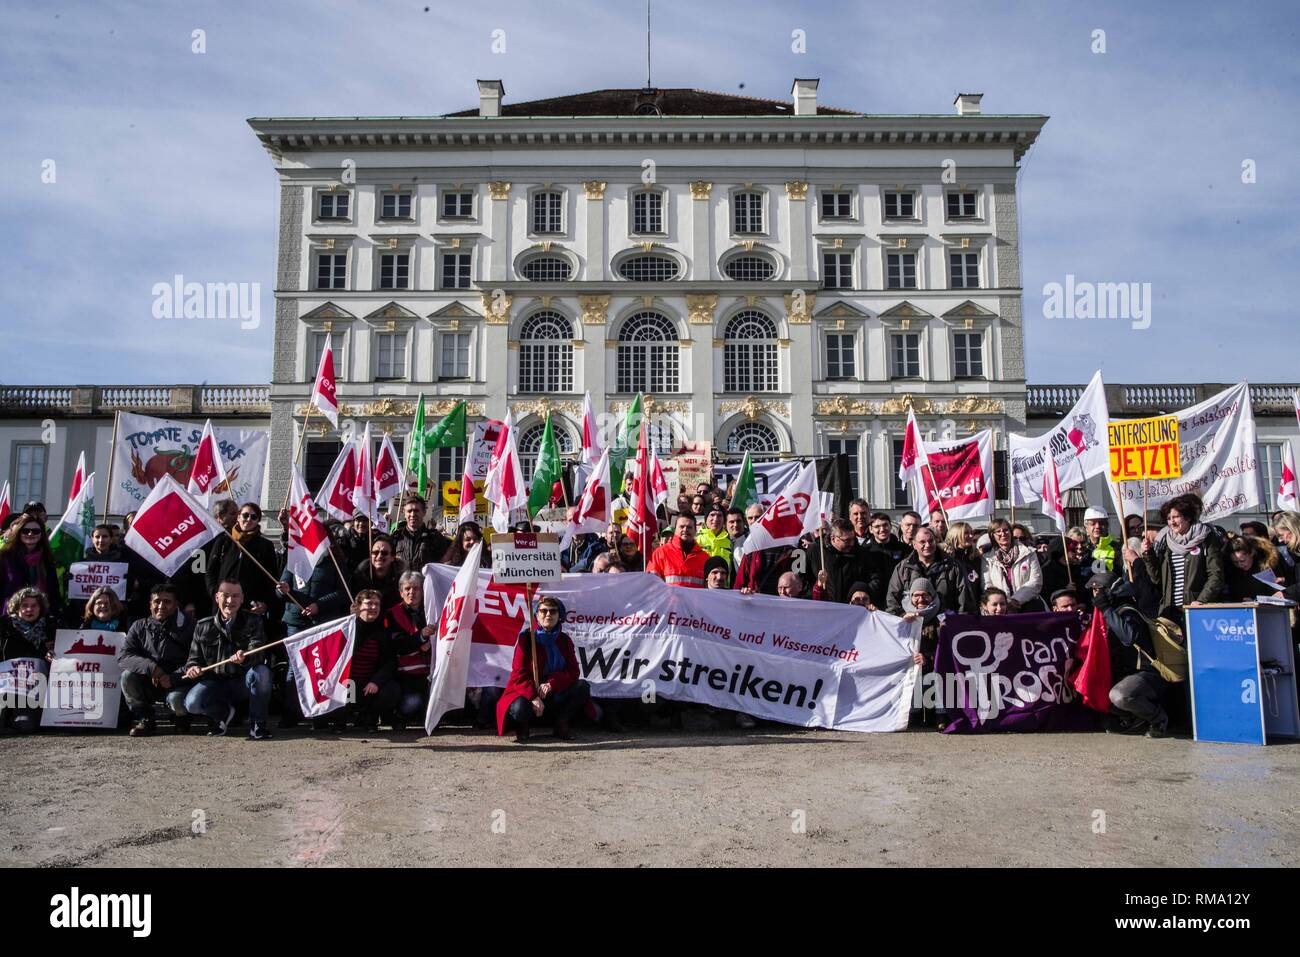 Munich, Bavaria, Germany. 14th Feb, 2019. Striking Verdi union employees pose in front of the famed Schloss Nymphenburg castle in Munich. To signify the failure of the second round of talks with employers, the German Verdi Ver.di labor union organized a 200  strong flashmob action at the famed Schloss Nymphenburg in Munich to kick off a new strike wave. Credit: ZUMA Press, Inc./Alamy Live News Stock Photo